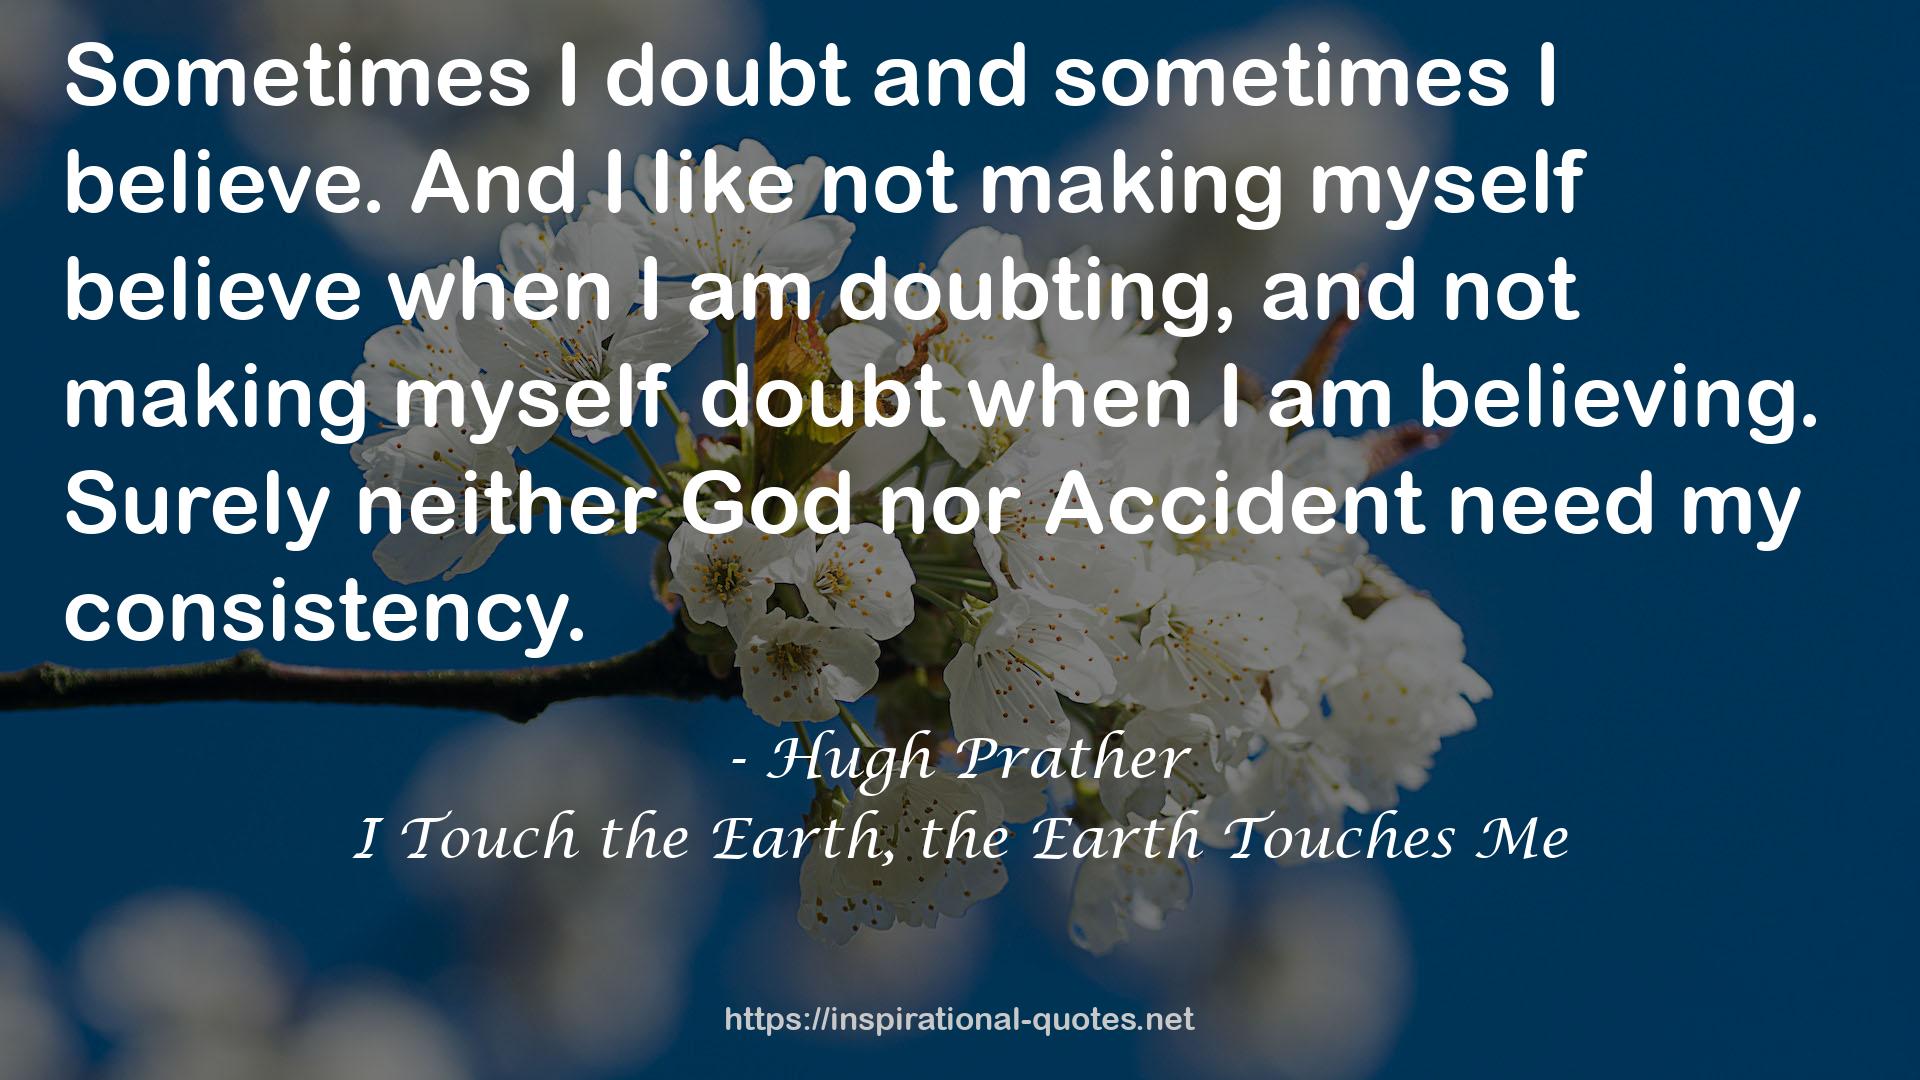 I Touch the Earth, the Earth Touches Me QUOTES